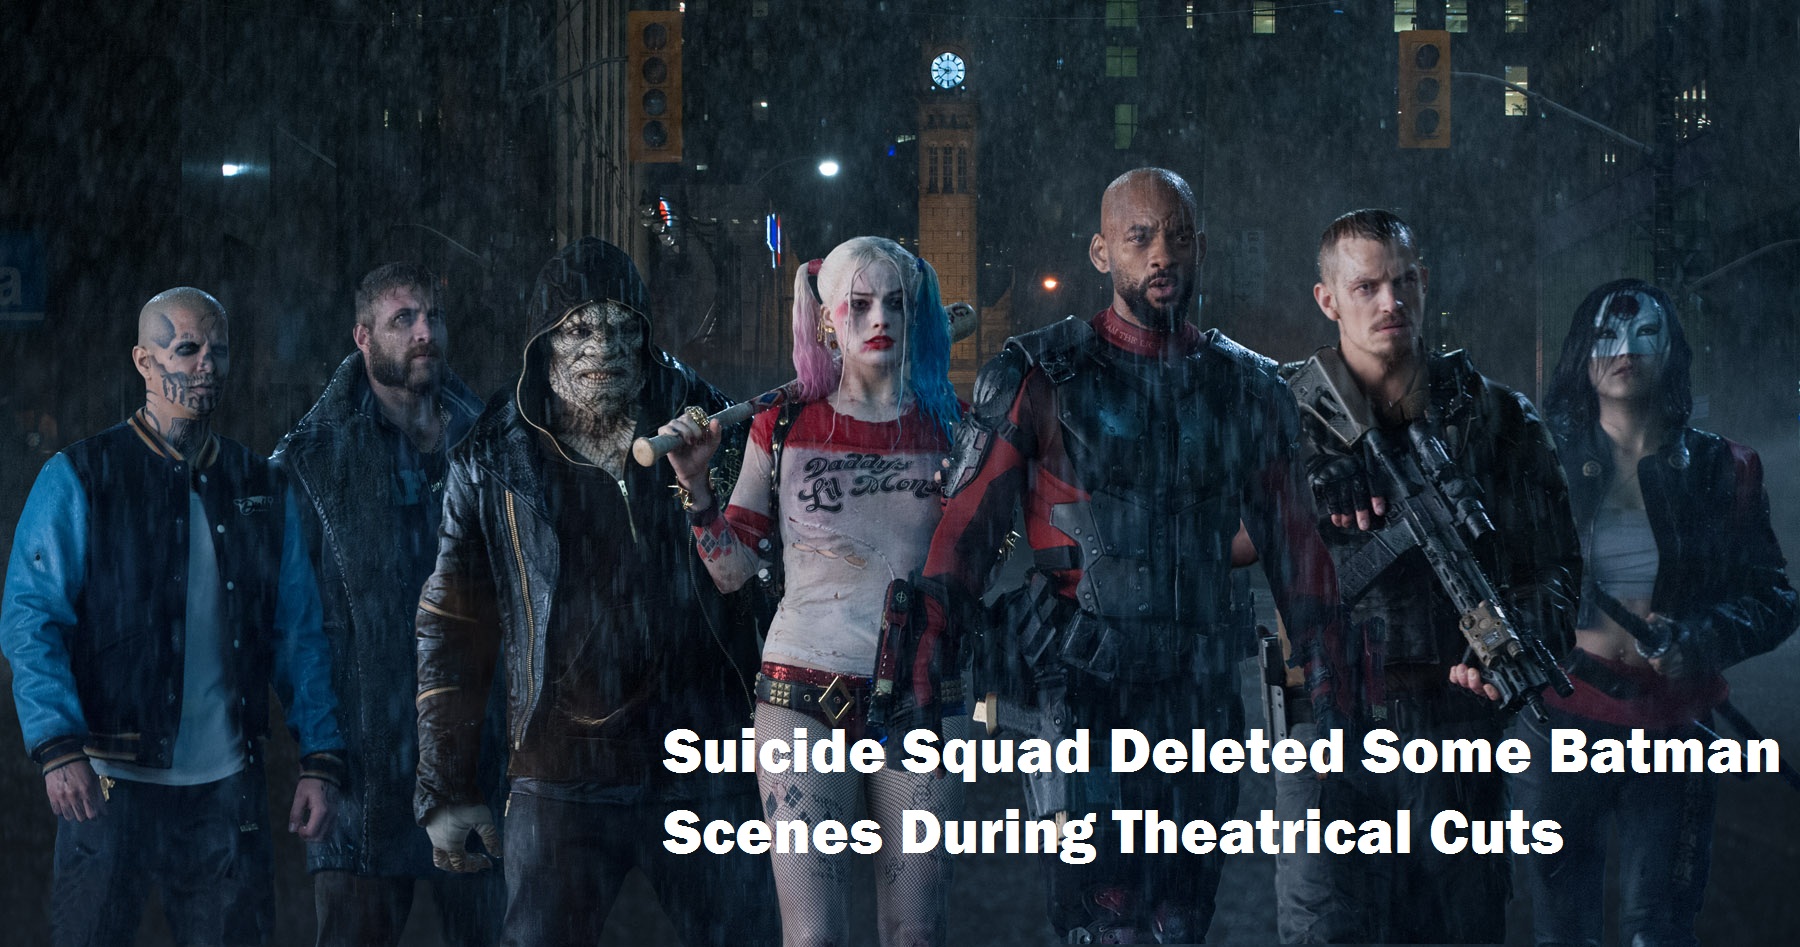 Suicide Squad Deleted Some Batman Scenes During Theatrical Cuts – karen jodes blog